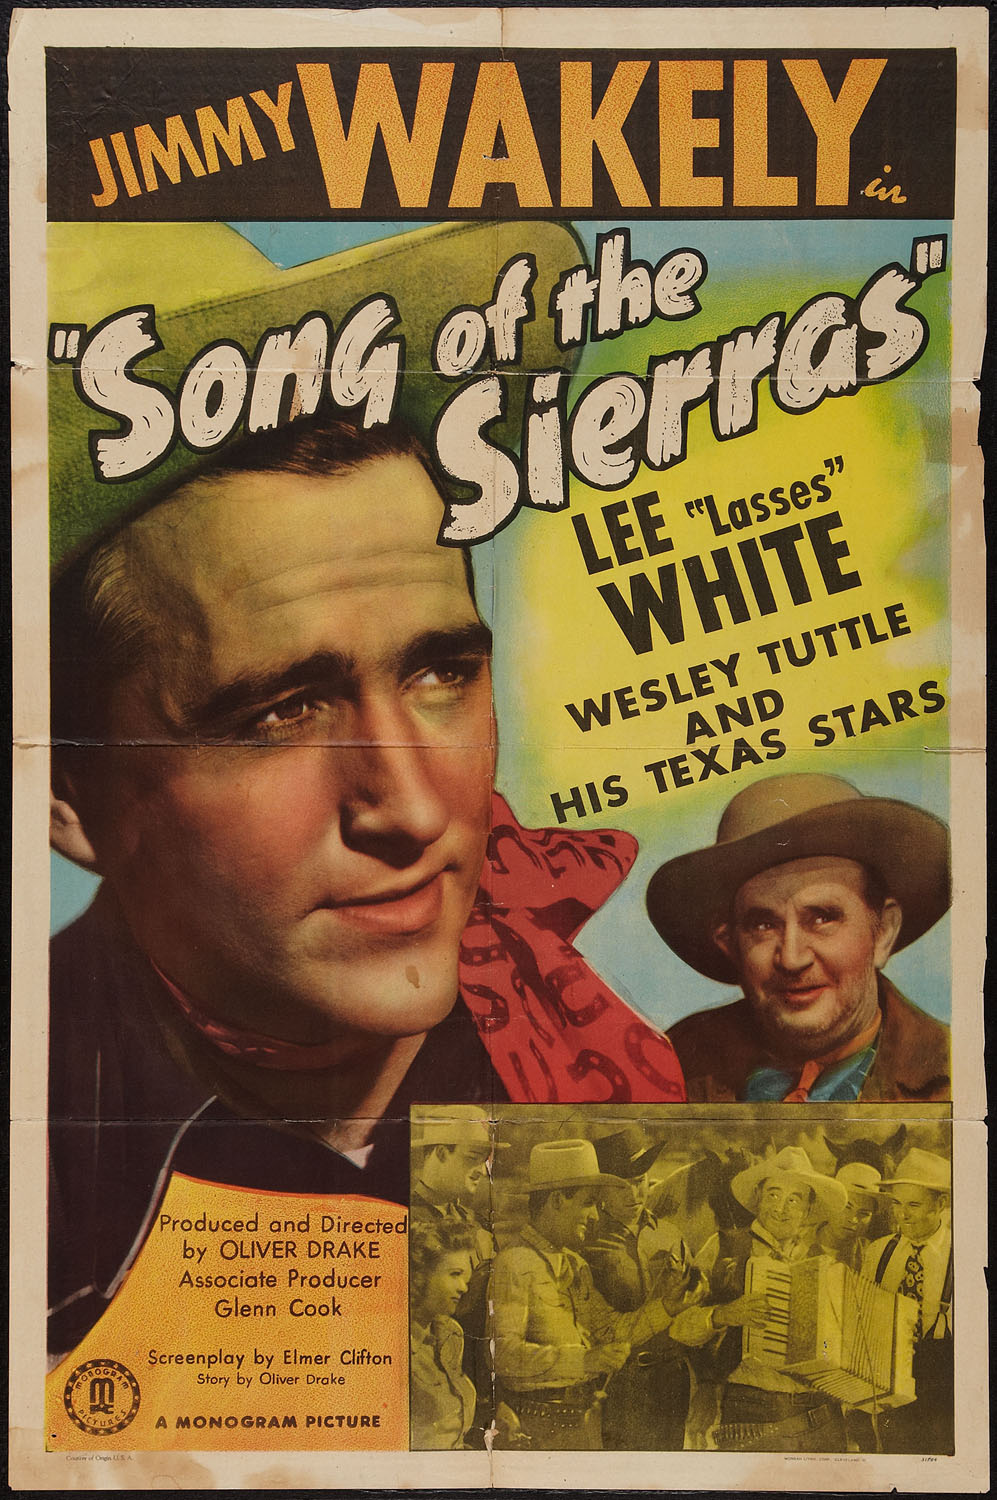 SONG OF THE SIERRAS